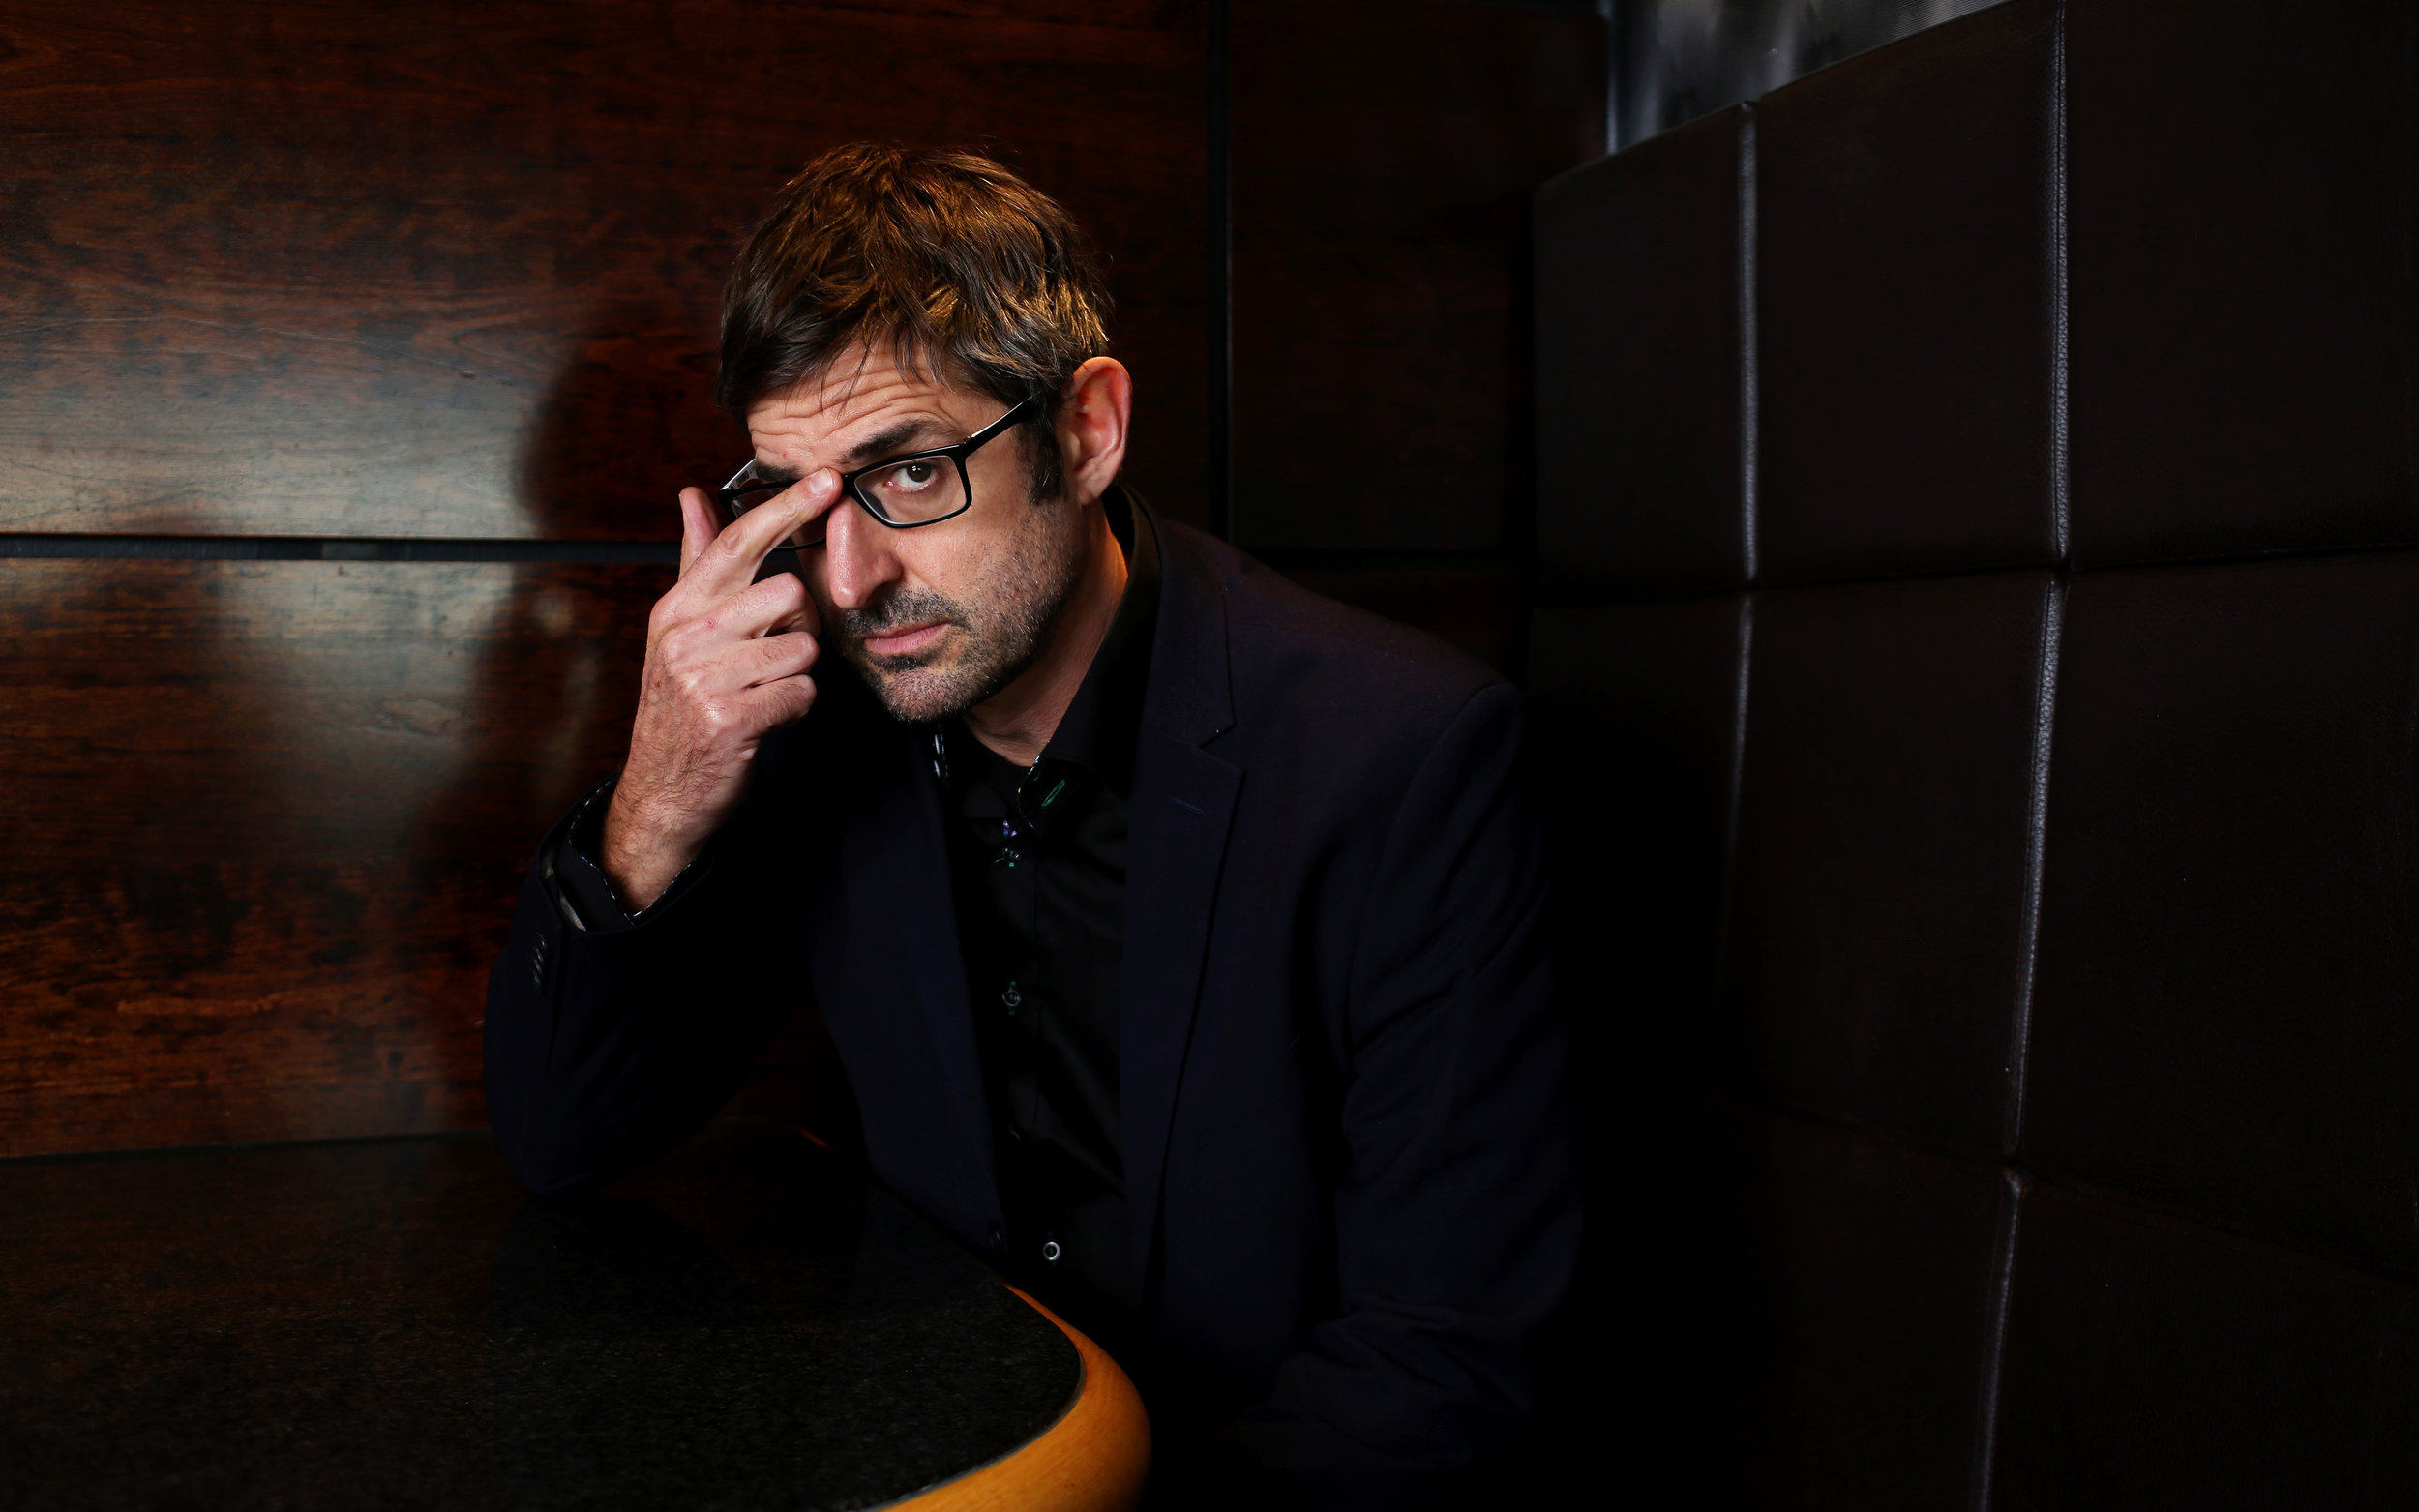  British documentary filmmaker and broadcaster Louis Theroux, photographed at The George's Hotel in central London.
Photo by Clara Molden, 30 October 2018
 